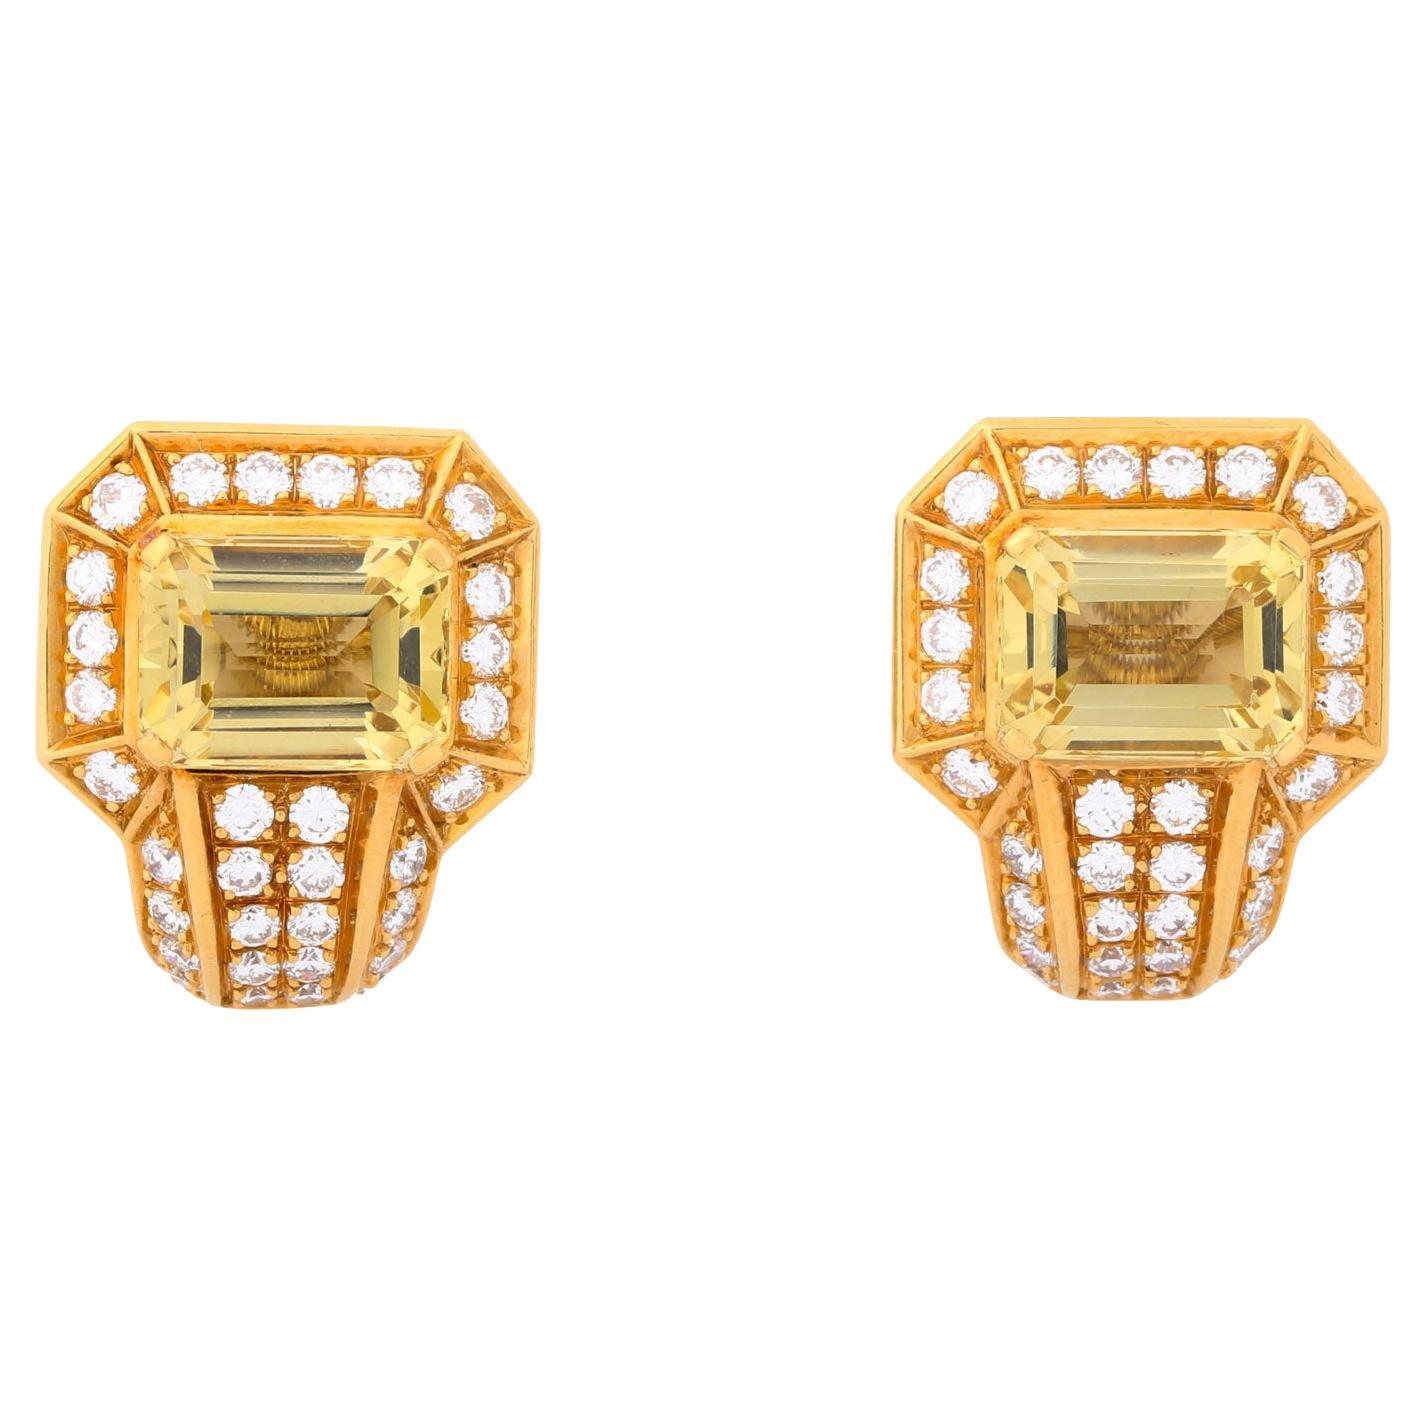 Pair of Ear Clips with 2 Yellow Heliodors 'Beryl' Approx. 3.0 Cts Each For Sale